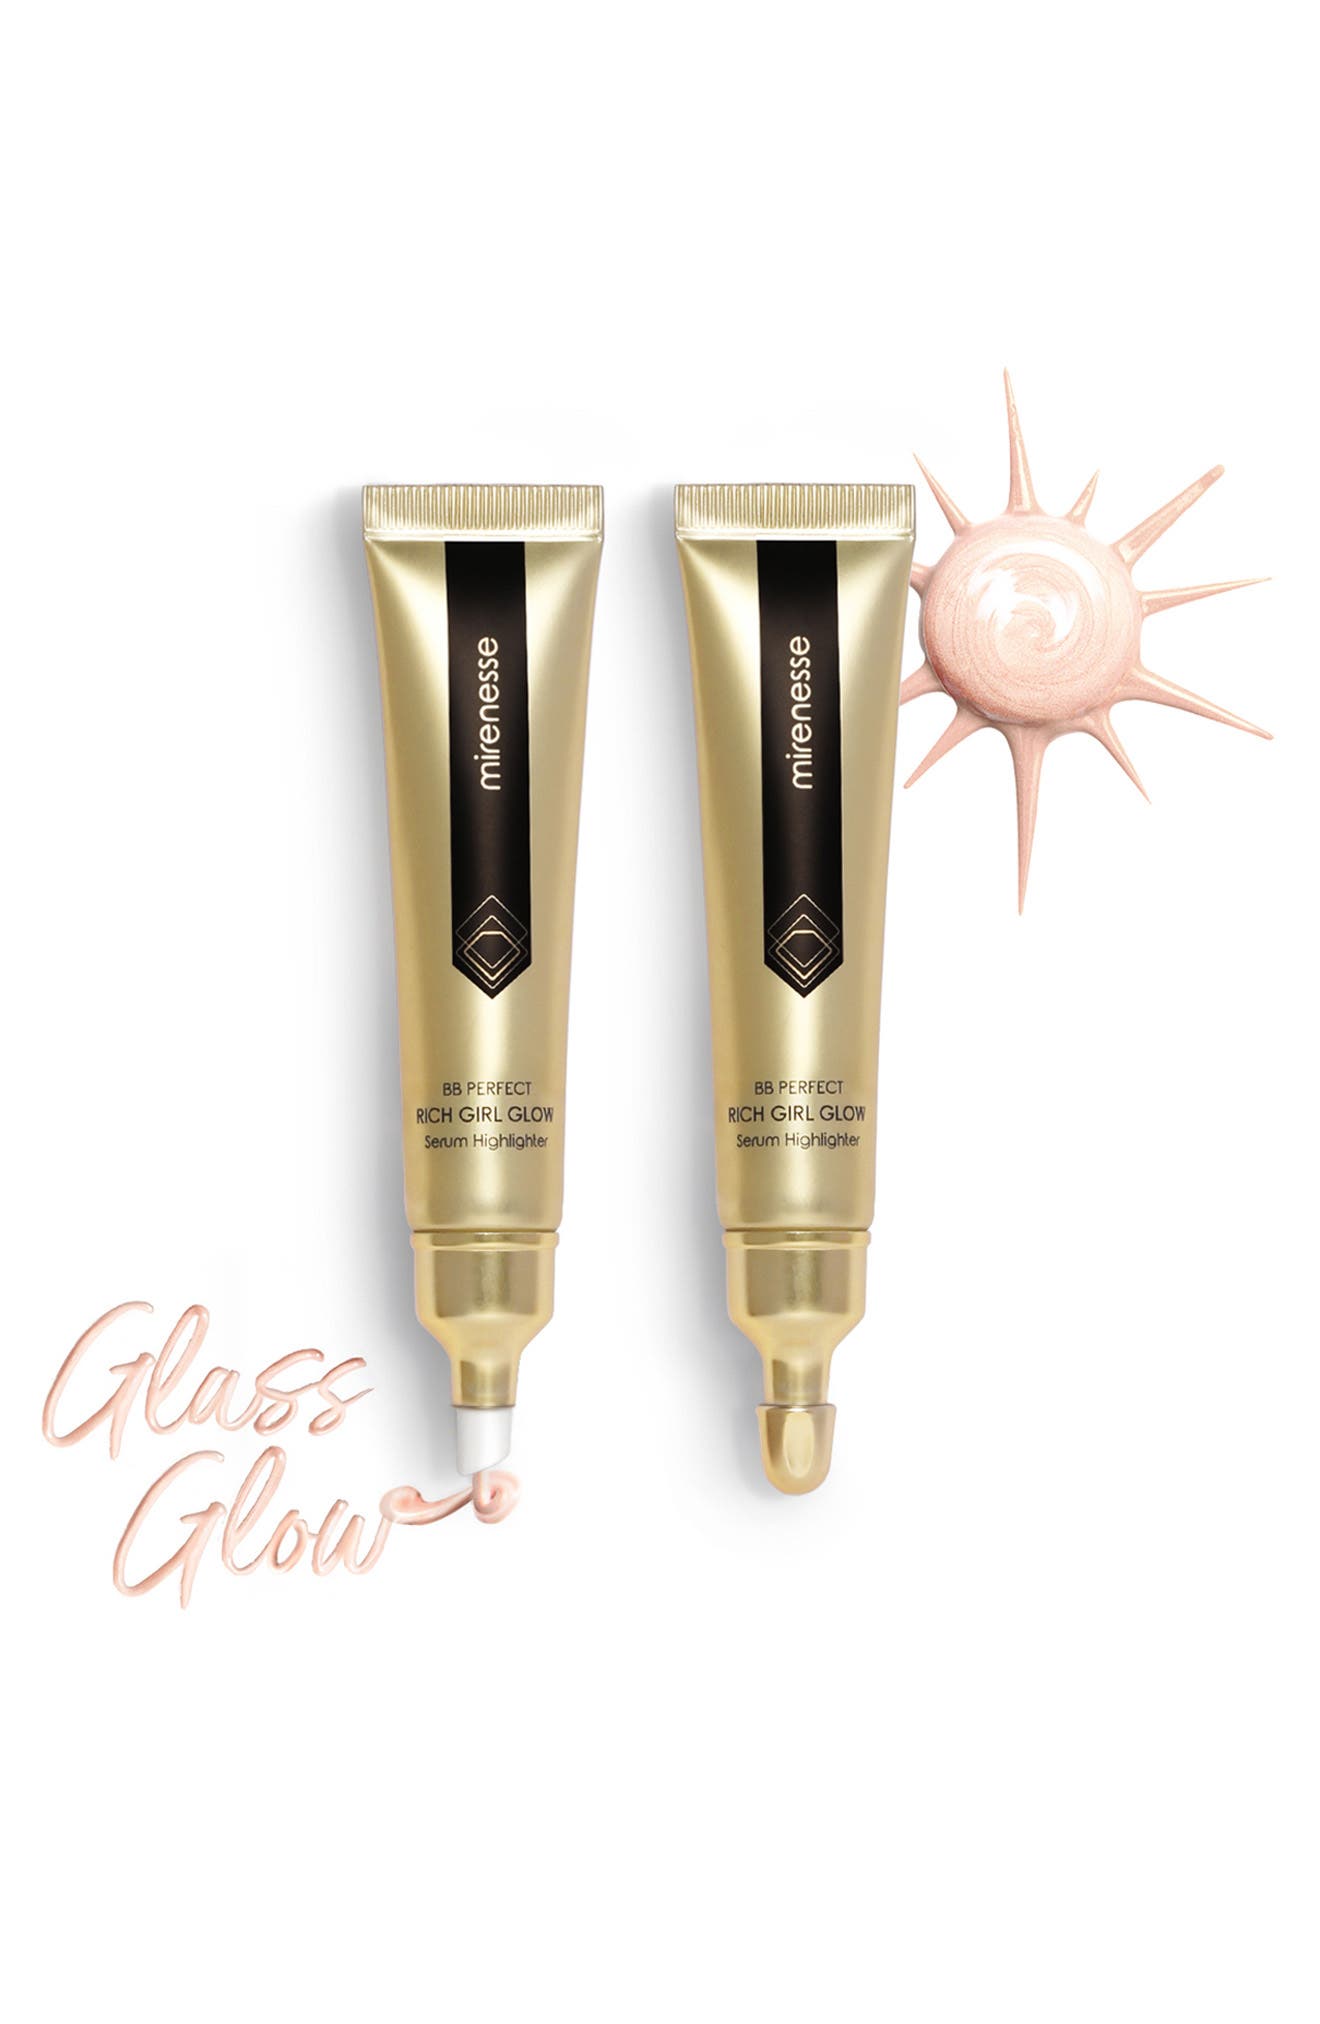 BB Perfect Rich Girl Glow Duo Mirenesse